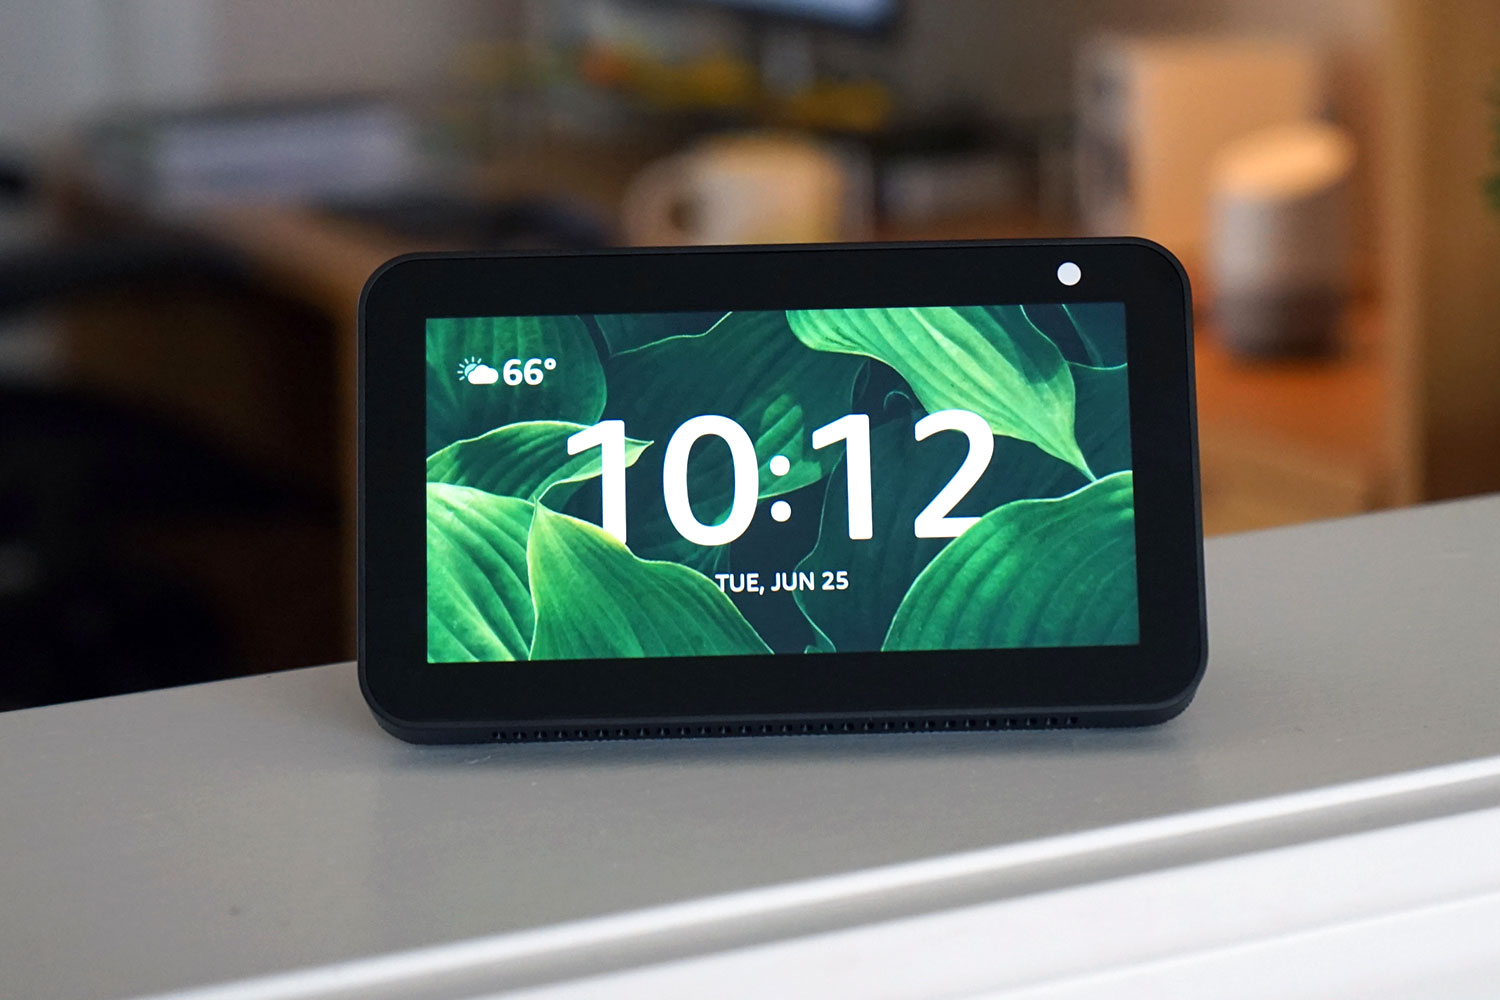 Echo Show 5 (2nd Gen) Review: a Smart Alarm Clock but Not Much More